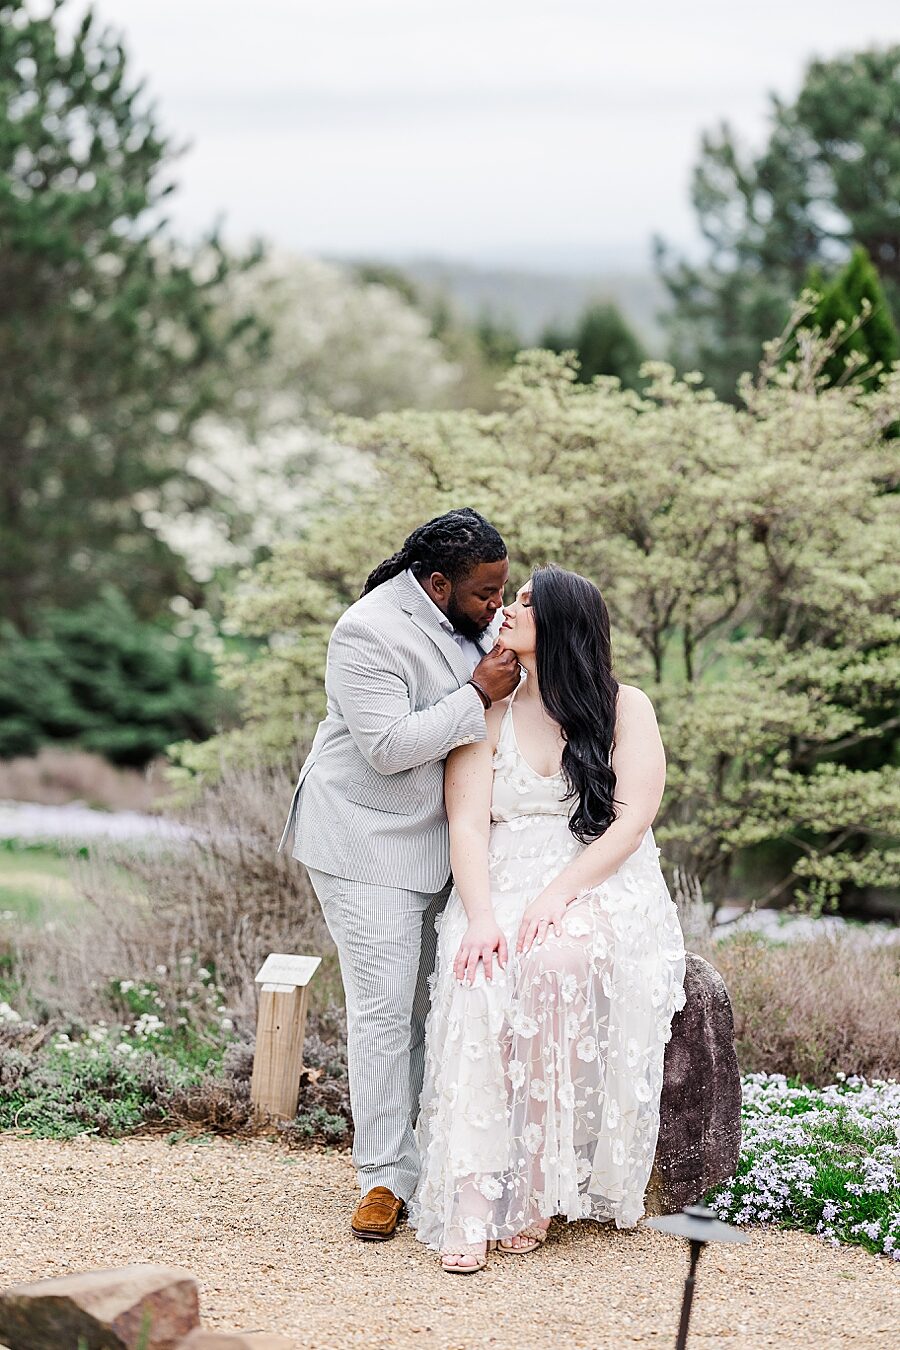 Hand on face at Garden Engagement Session by Amanda May Photos